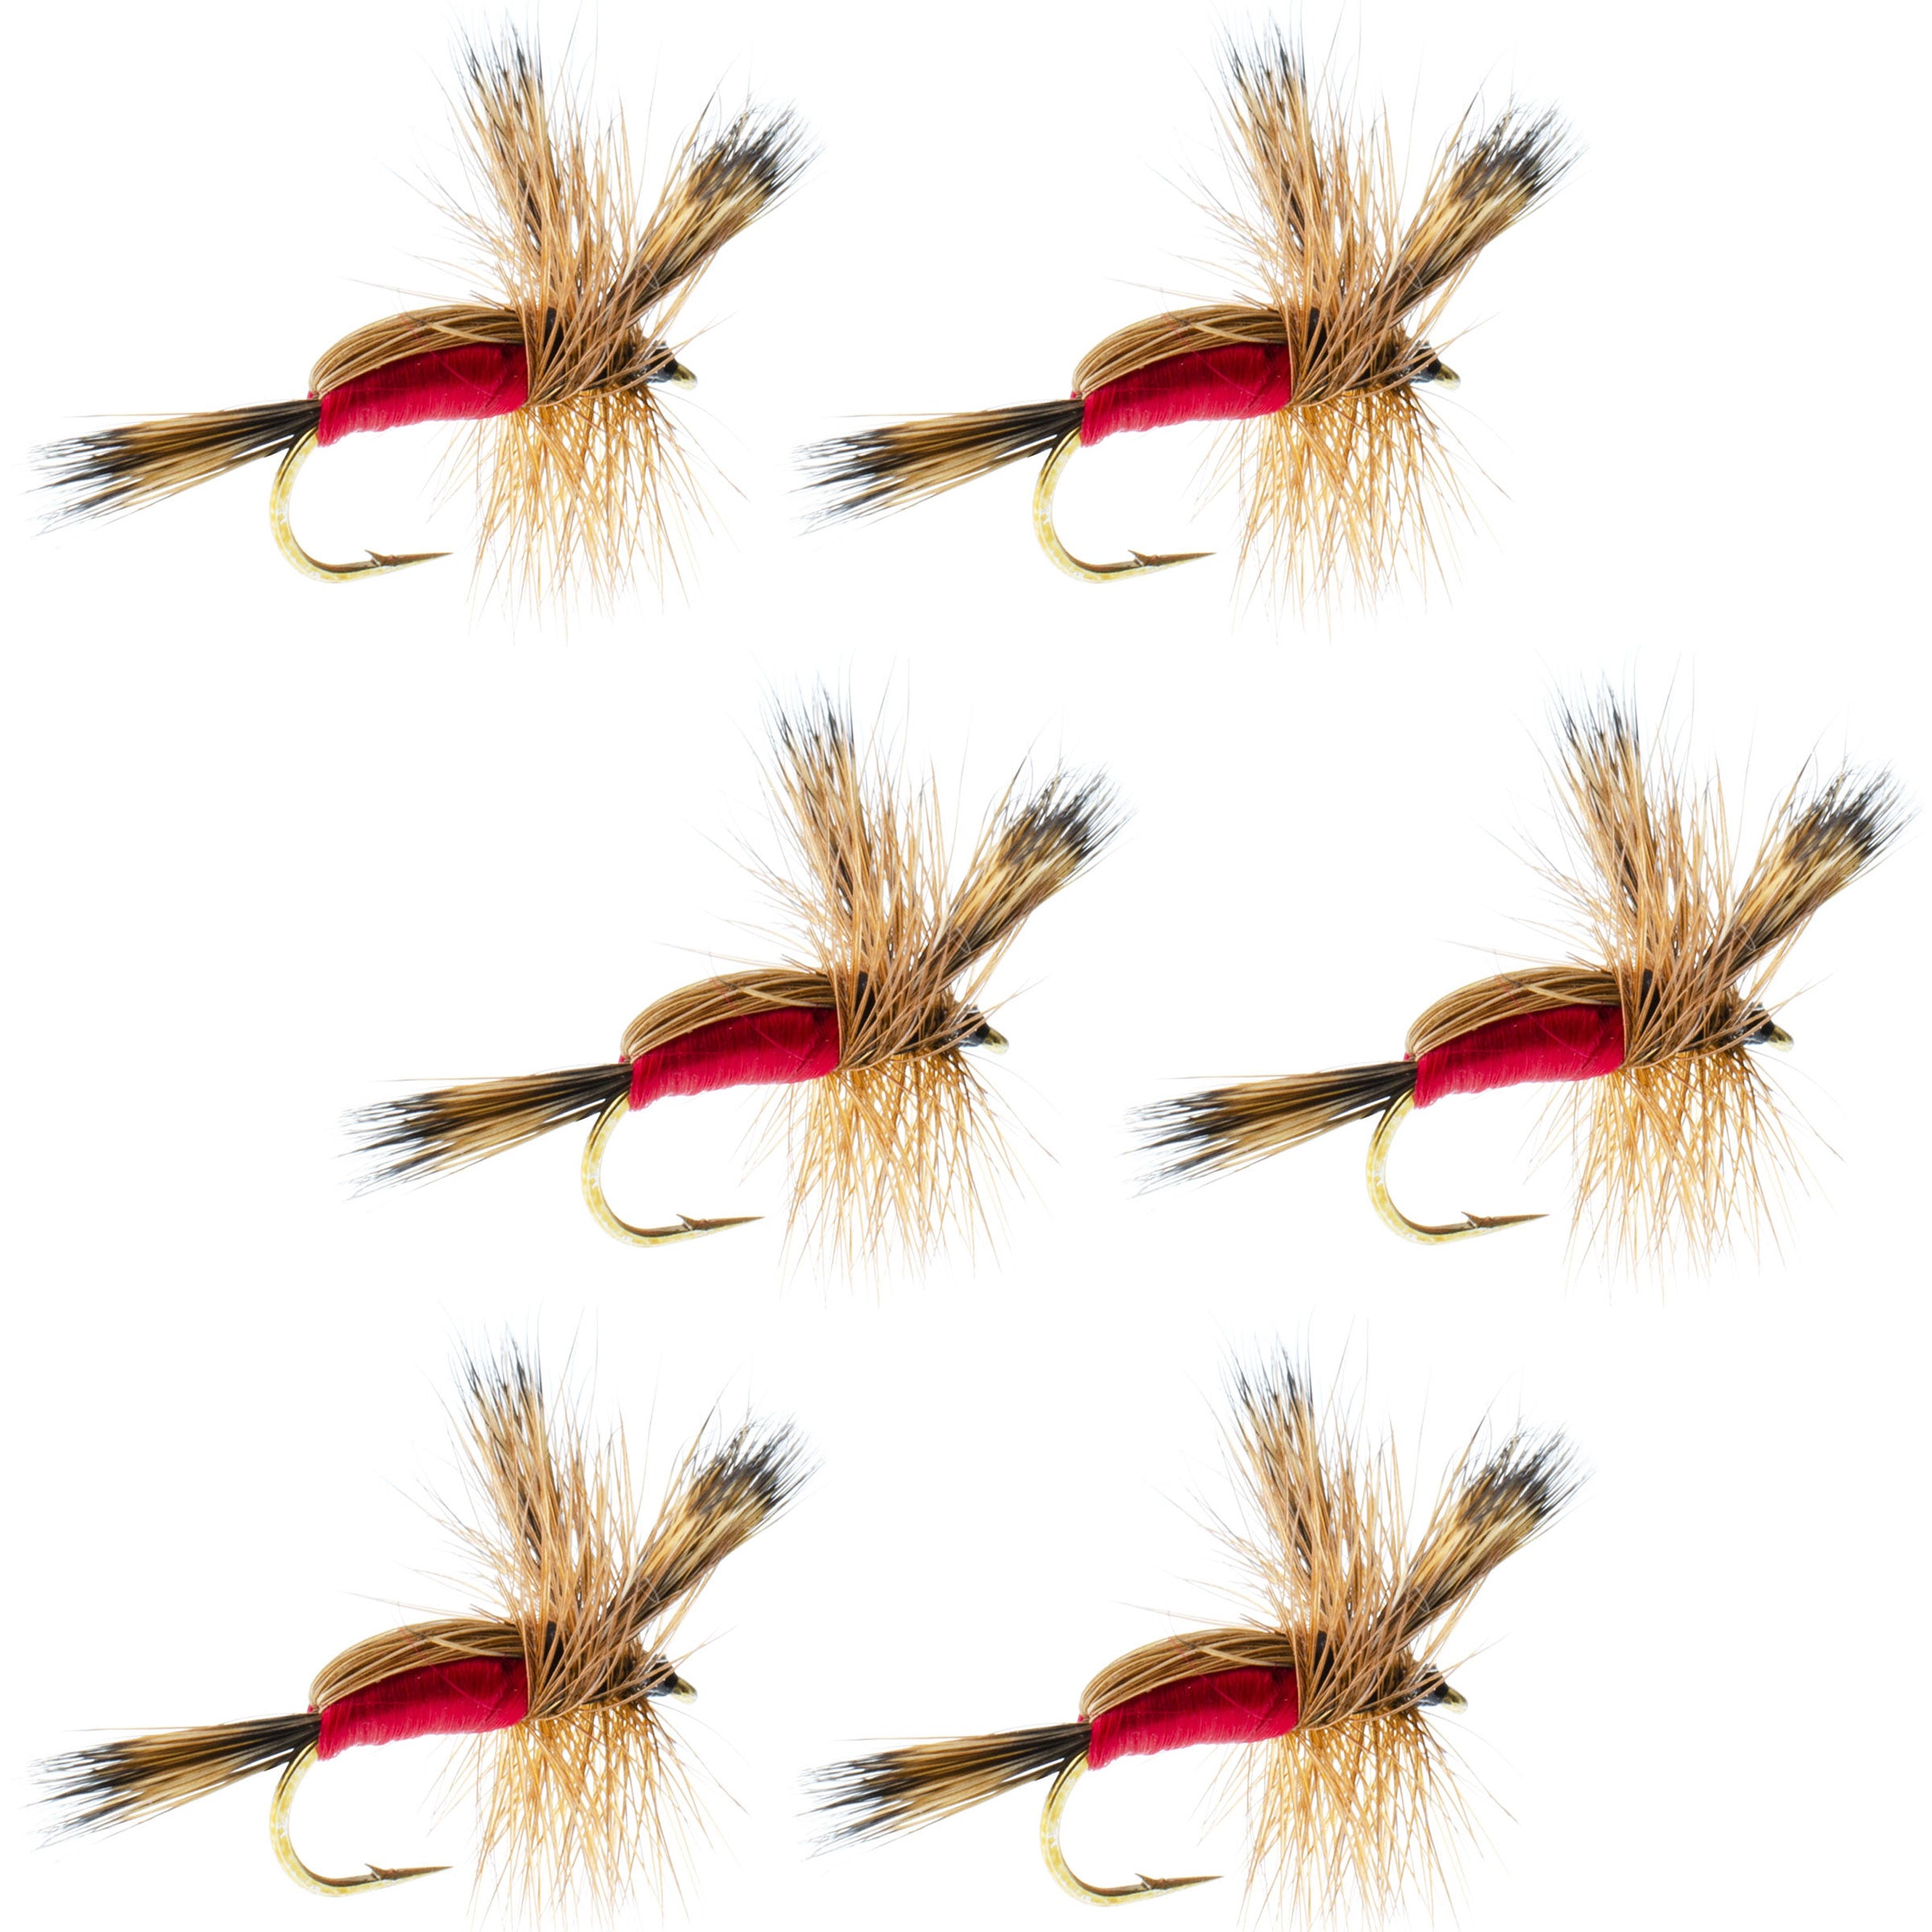 Mosca seca Red Humpy Classic Hair Wing - 6 moscas anzuelo tamaño 10